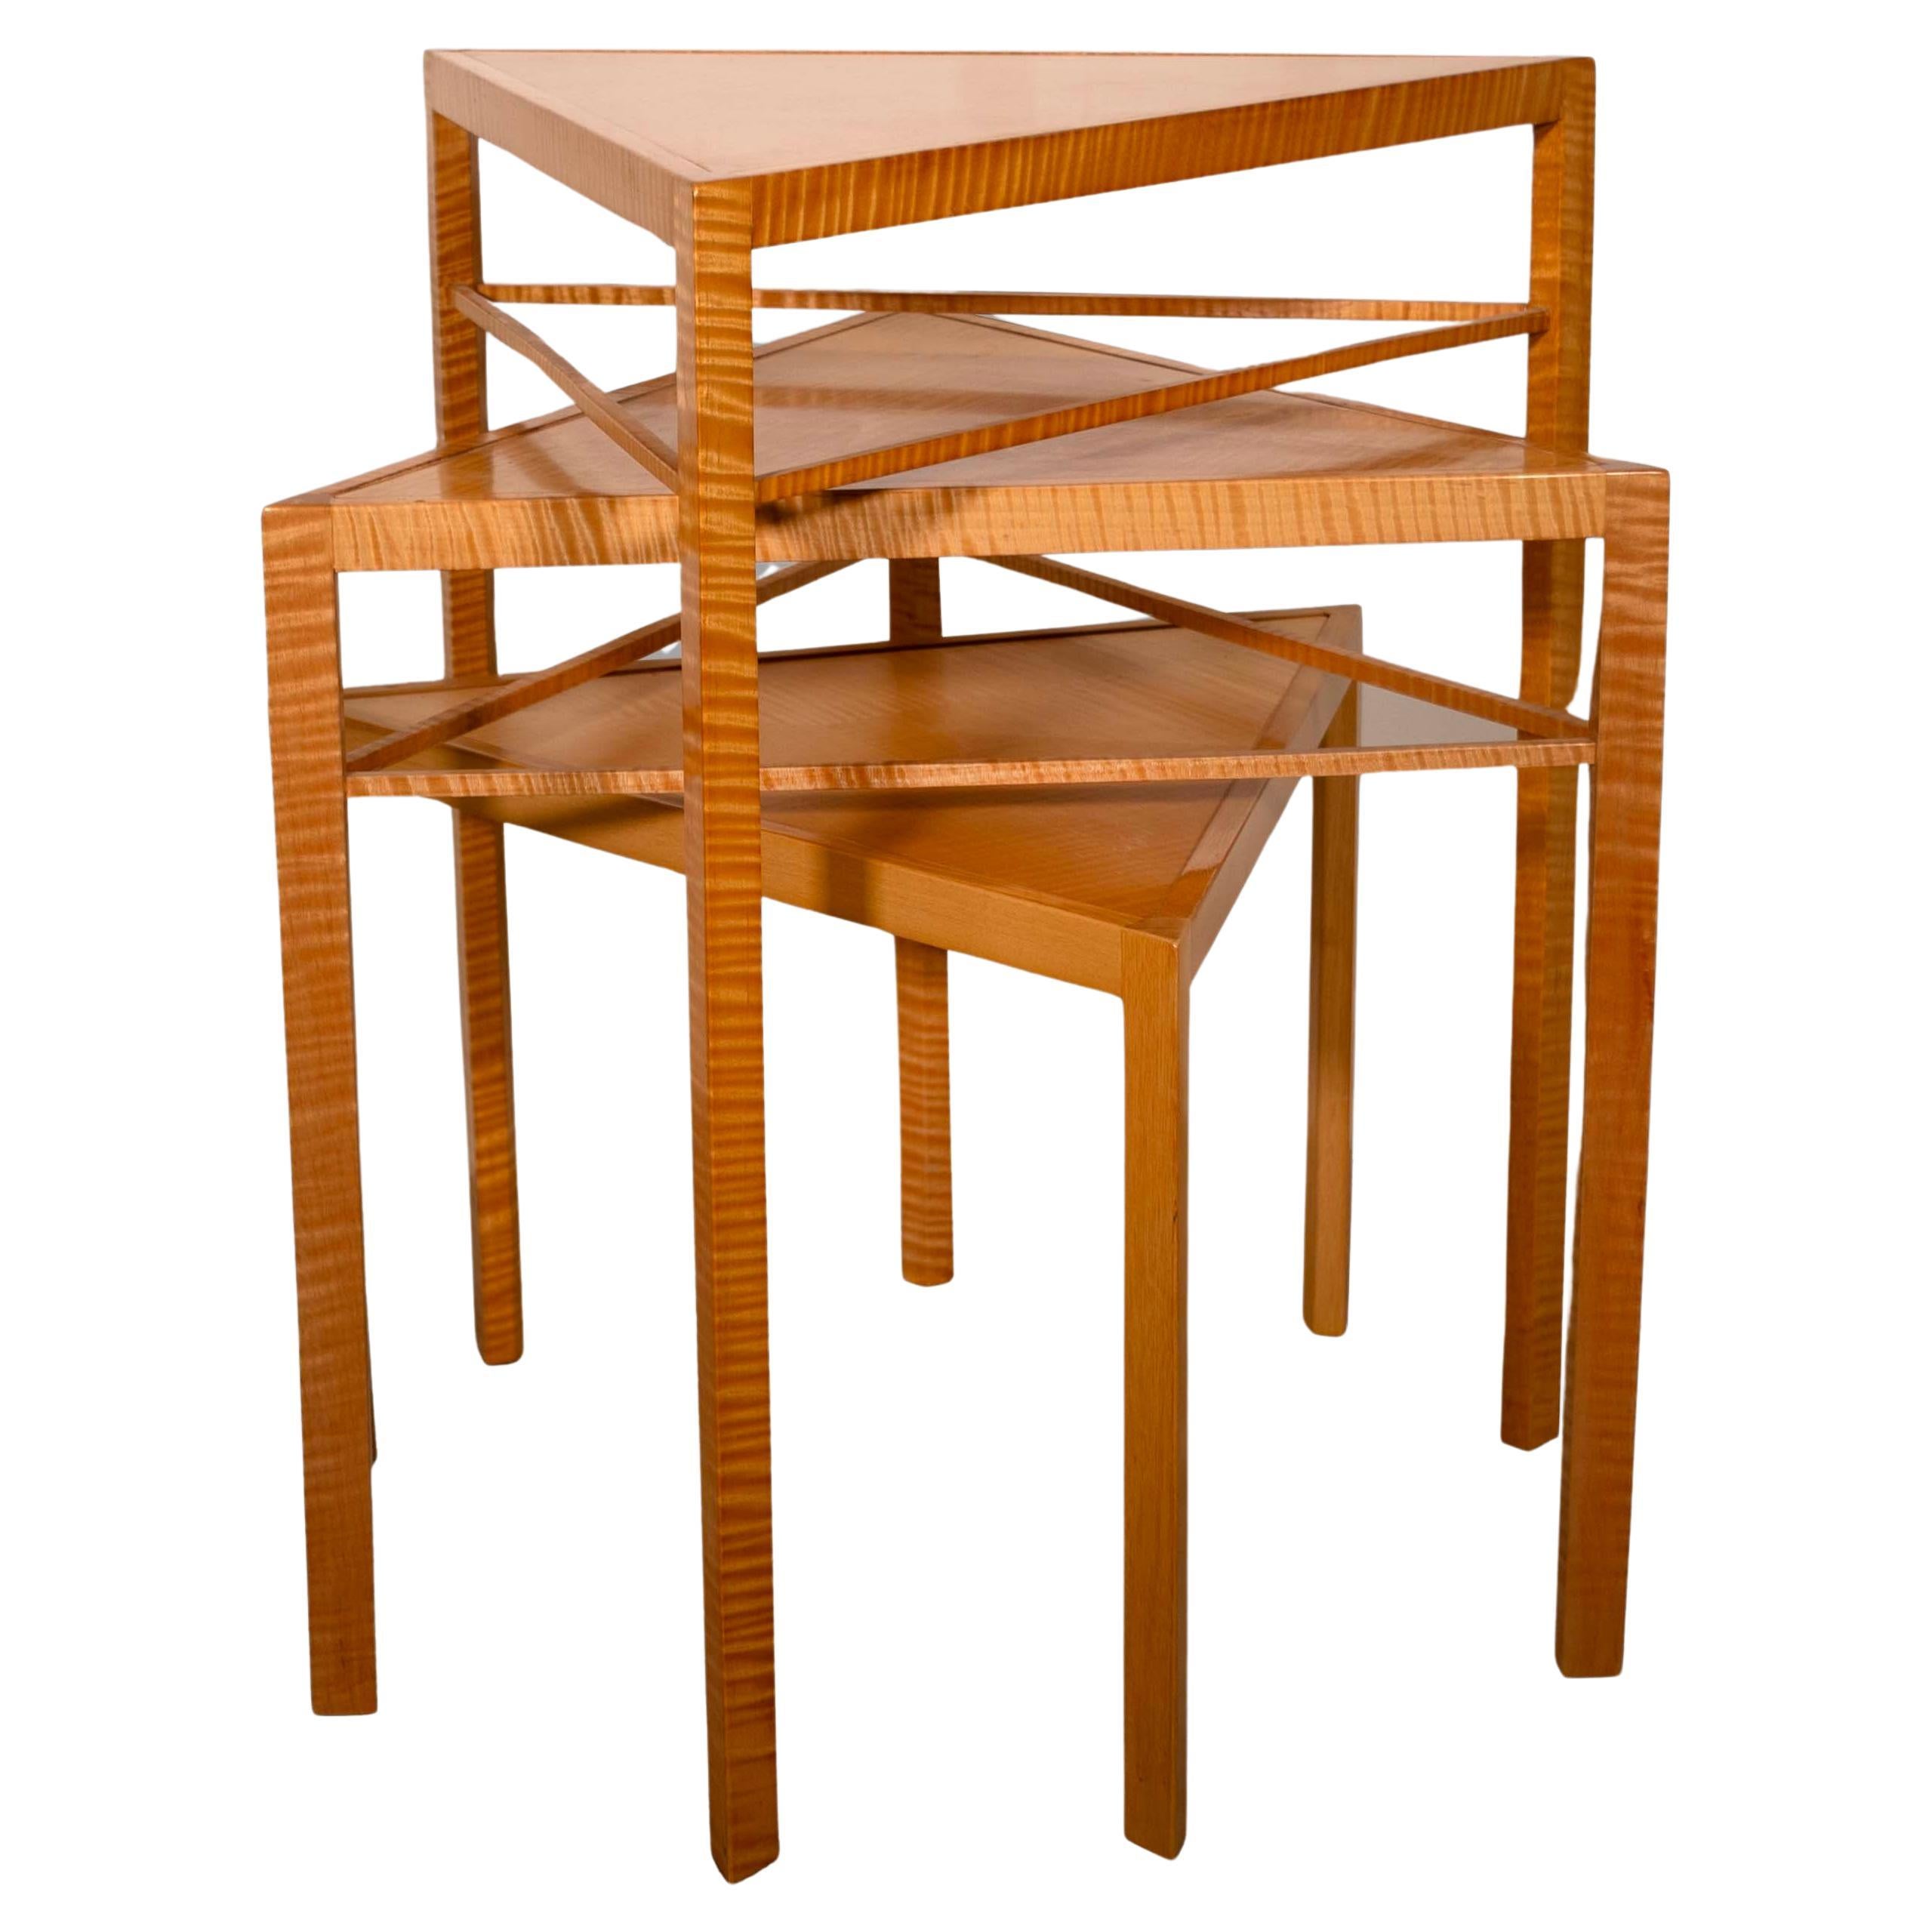 Ralph Rye Kite Tables Signed Set of 3 Postmodern Nesting Tables Curly Maple Wood For Sale